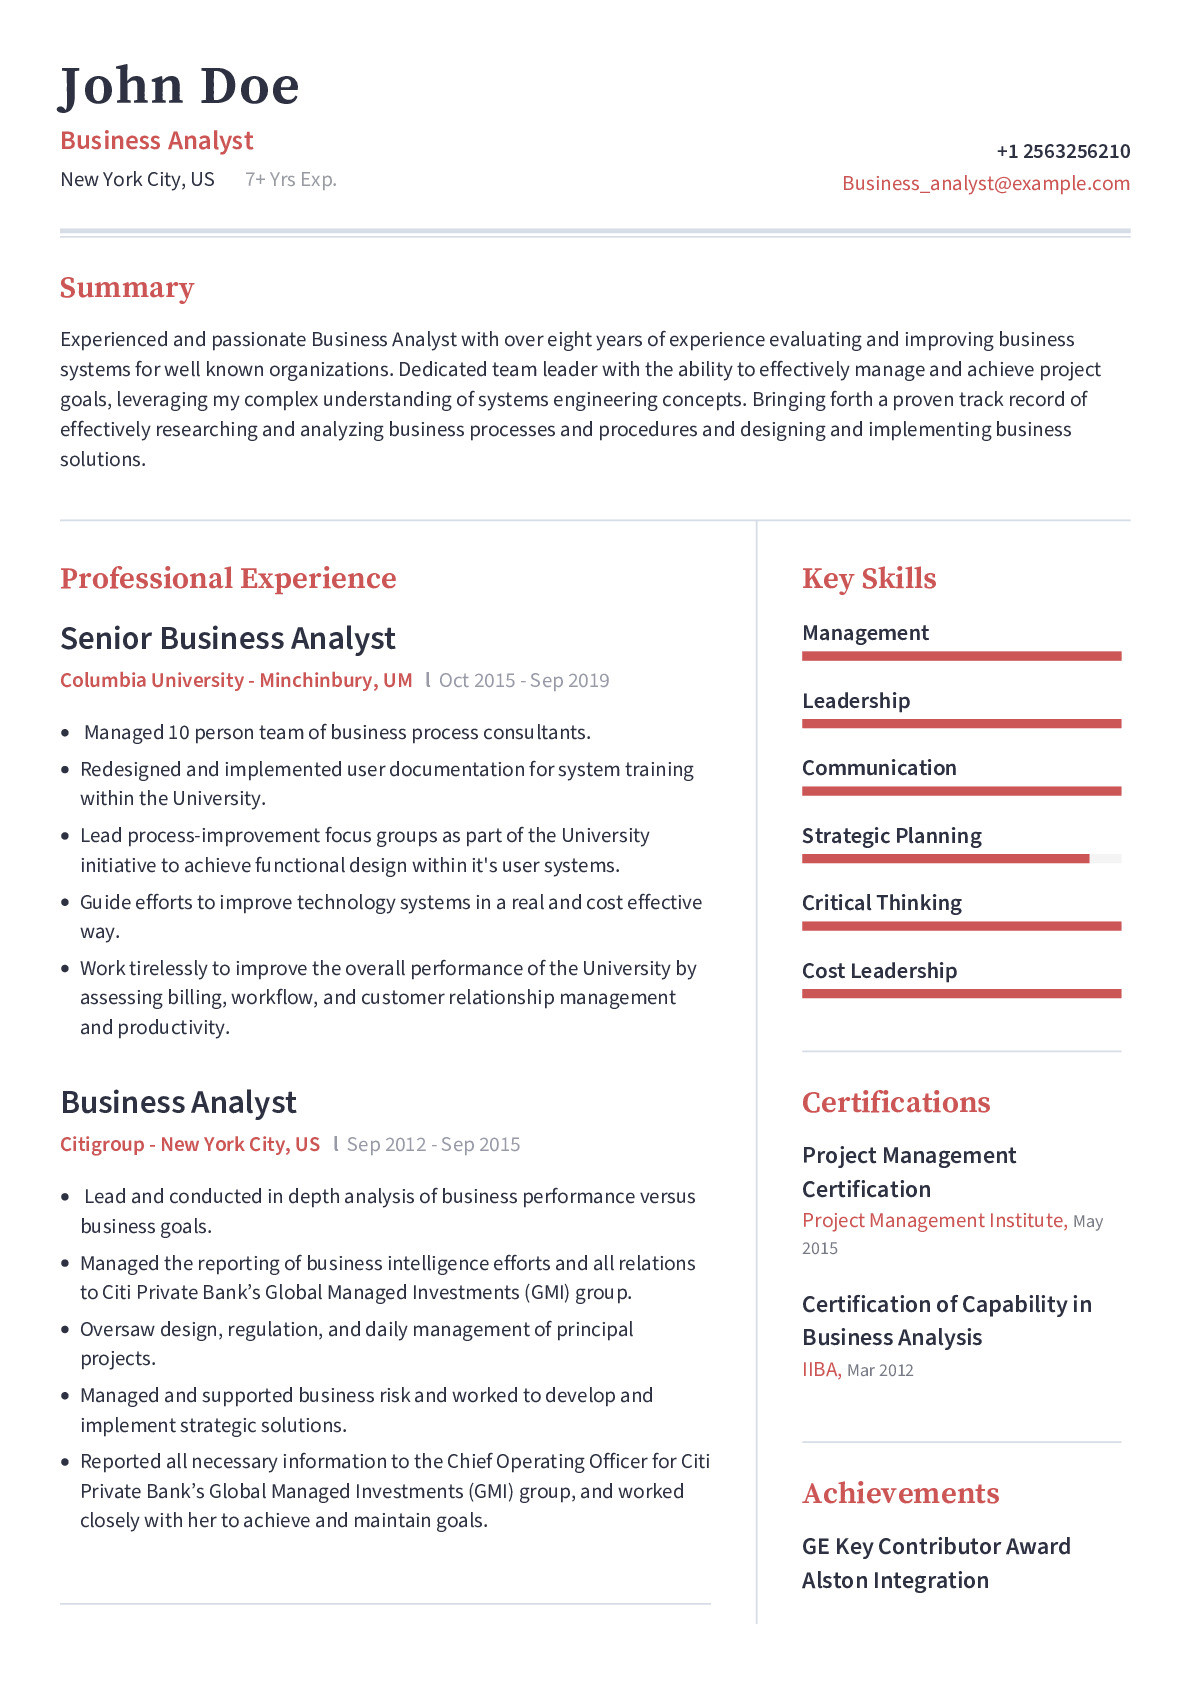 Sample Resume Summary for Business Analyst Business Analyst Resume Example with Pre-written Content Sample …